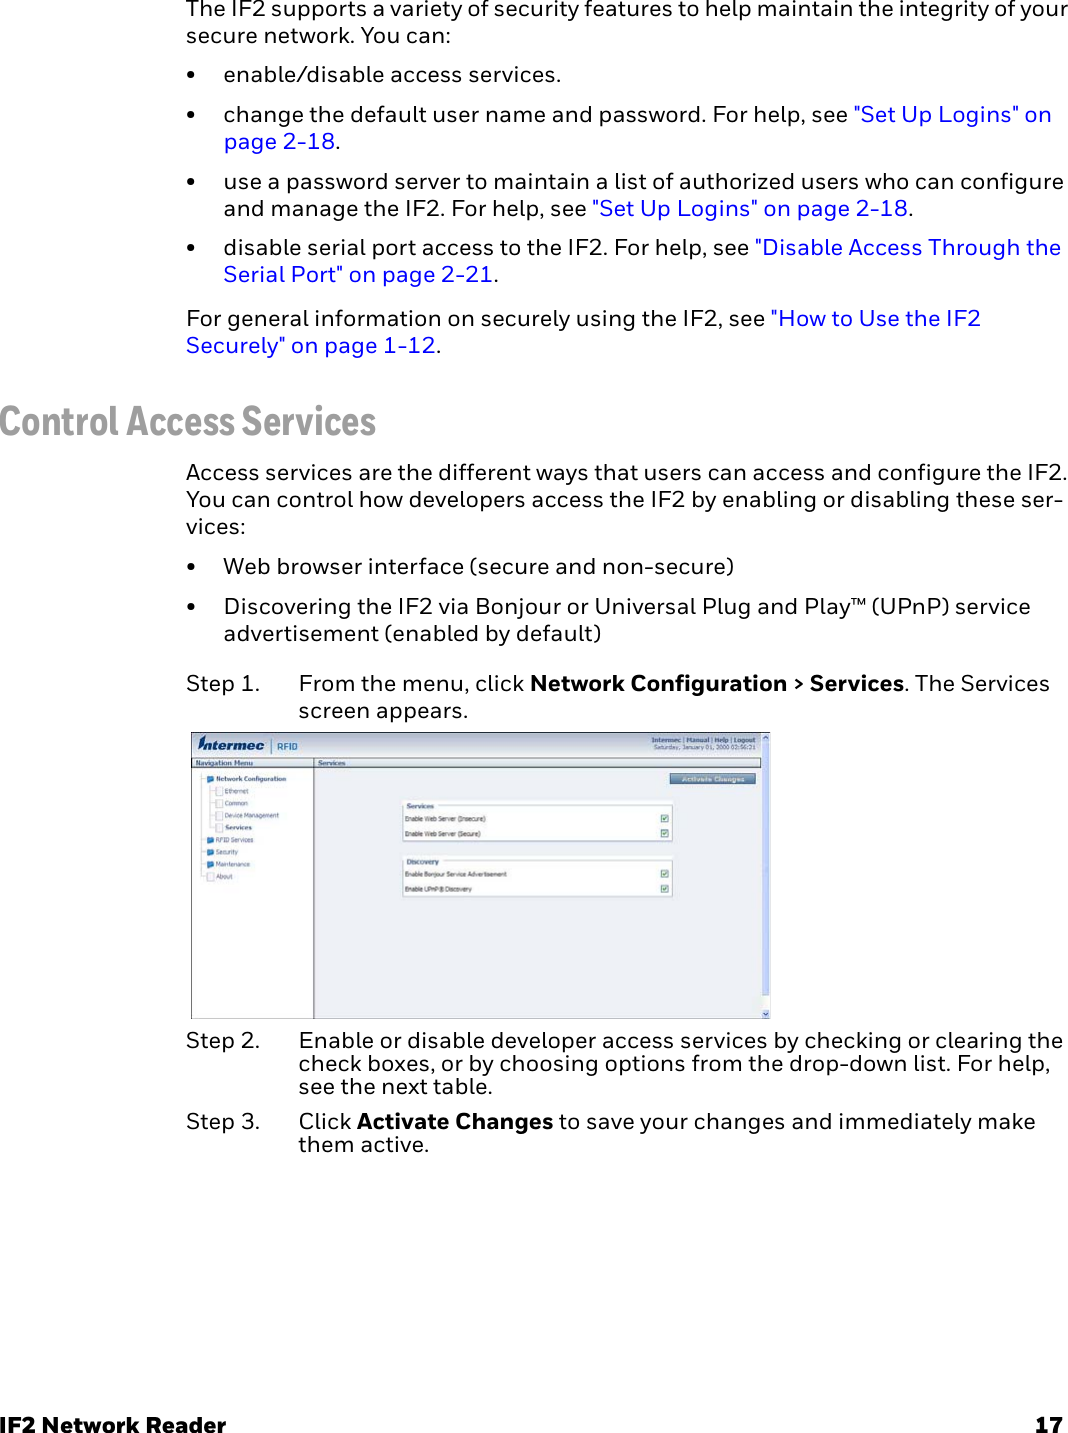 IF2 Network Reader 17The IF2 supports a variety of security features to help maintain the integrity of your secure network. You can:• enable/disable access services.• change the default user name and password. For help, see &quot;Set Up Logins&quot; on page 2-18.• use a password server to maintain a list of authorized users who can configure and manage the IF2. For help, see &quot;Set Up Logins&quot; on page 2-18.• disable serial port access to the IF2. For help, see &quot;Disable Access Through the Serial Port&quot; on page 2-21.For general information on securely using the IF2, see &quot;How to Use the IF2 Securely&quot; on page 1-12.Control Access ServicesAccess services are the different ways that users can access and configure the IF2. You can control how developers access the IF2 by enabling or disabling these ser-vices:• Web browser interface (secure and non-secure)• Discovering the IF2 via Bonjour or Universal Plug and Play™ (UPnP) service advertisement (enabled by default)Step 1. From the menu, click Network Configuration &gt; Services. The Services screen appears.Step 2. Enable or disable developer access services by checking or clearing the check boxes, or by choosing options from the drop-down list. For help, see the next table.Step 3. Click Activate Changes to save your changes and immediately make them active.